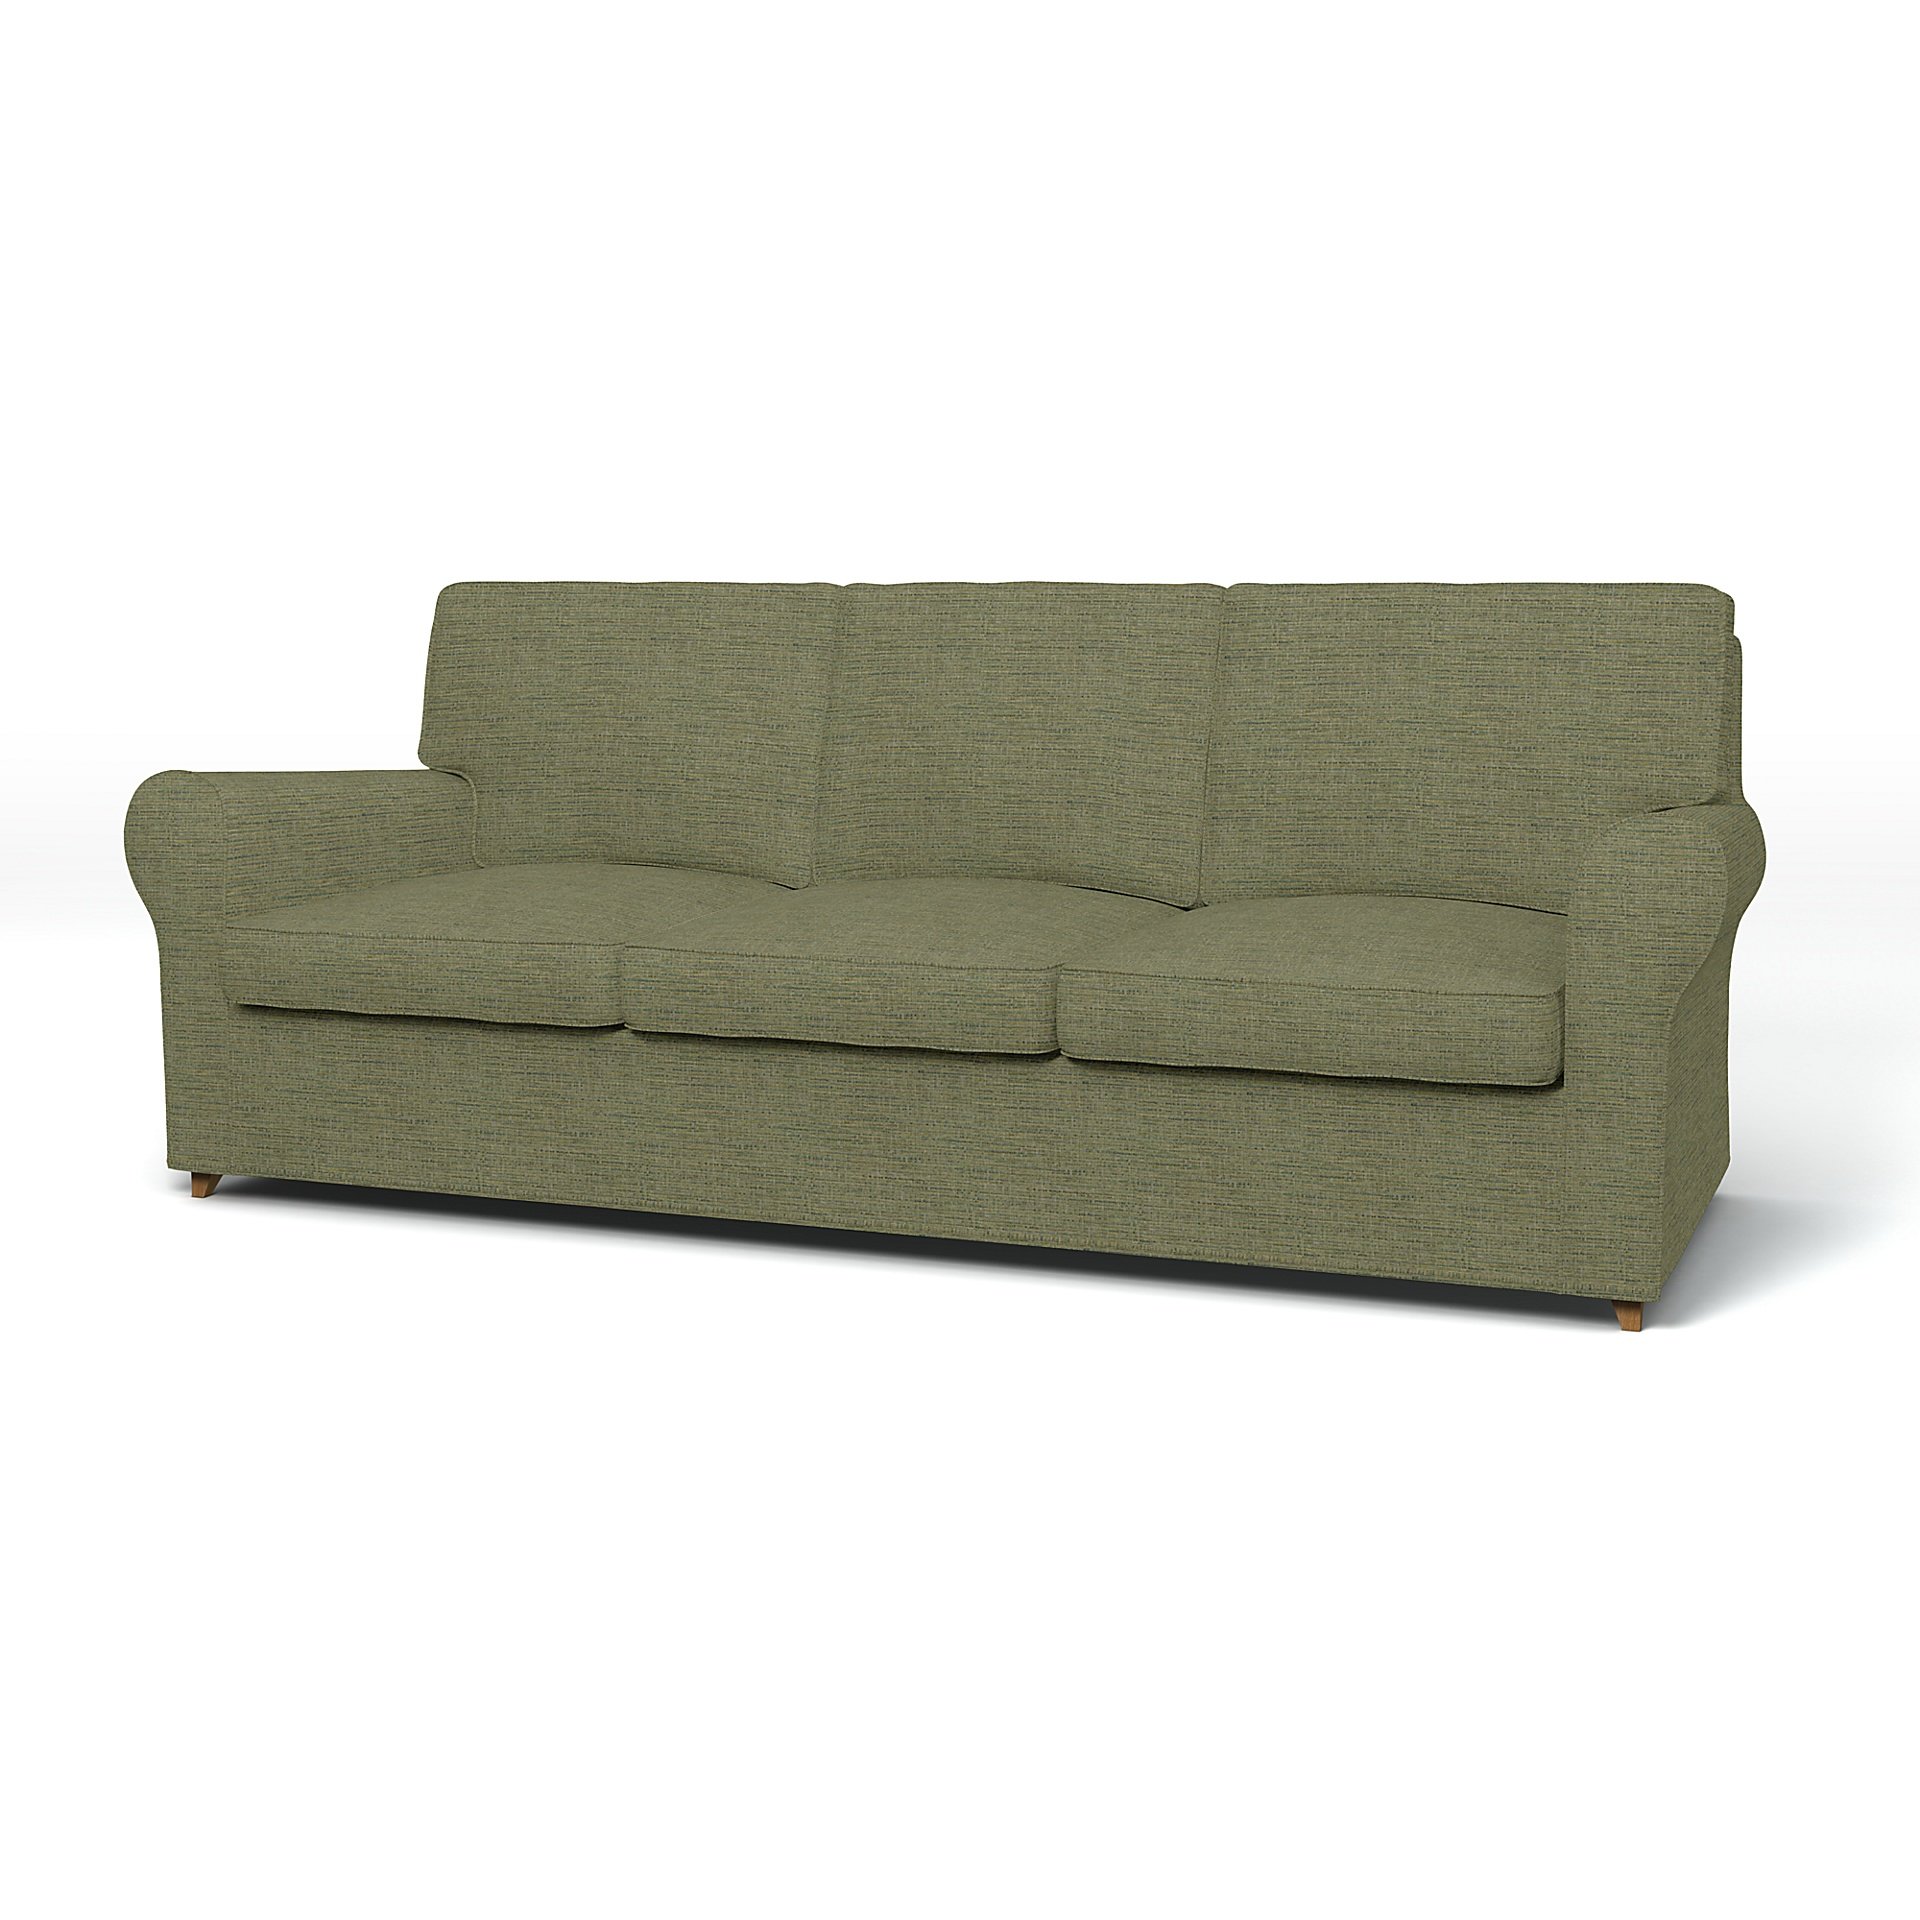 IKEA - Angby 3 Seater Sofa Cover, Meadow Green, Boucle & Texture - Bemz